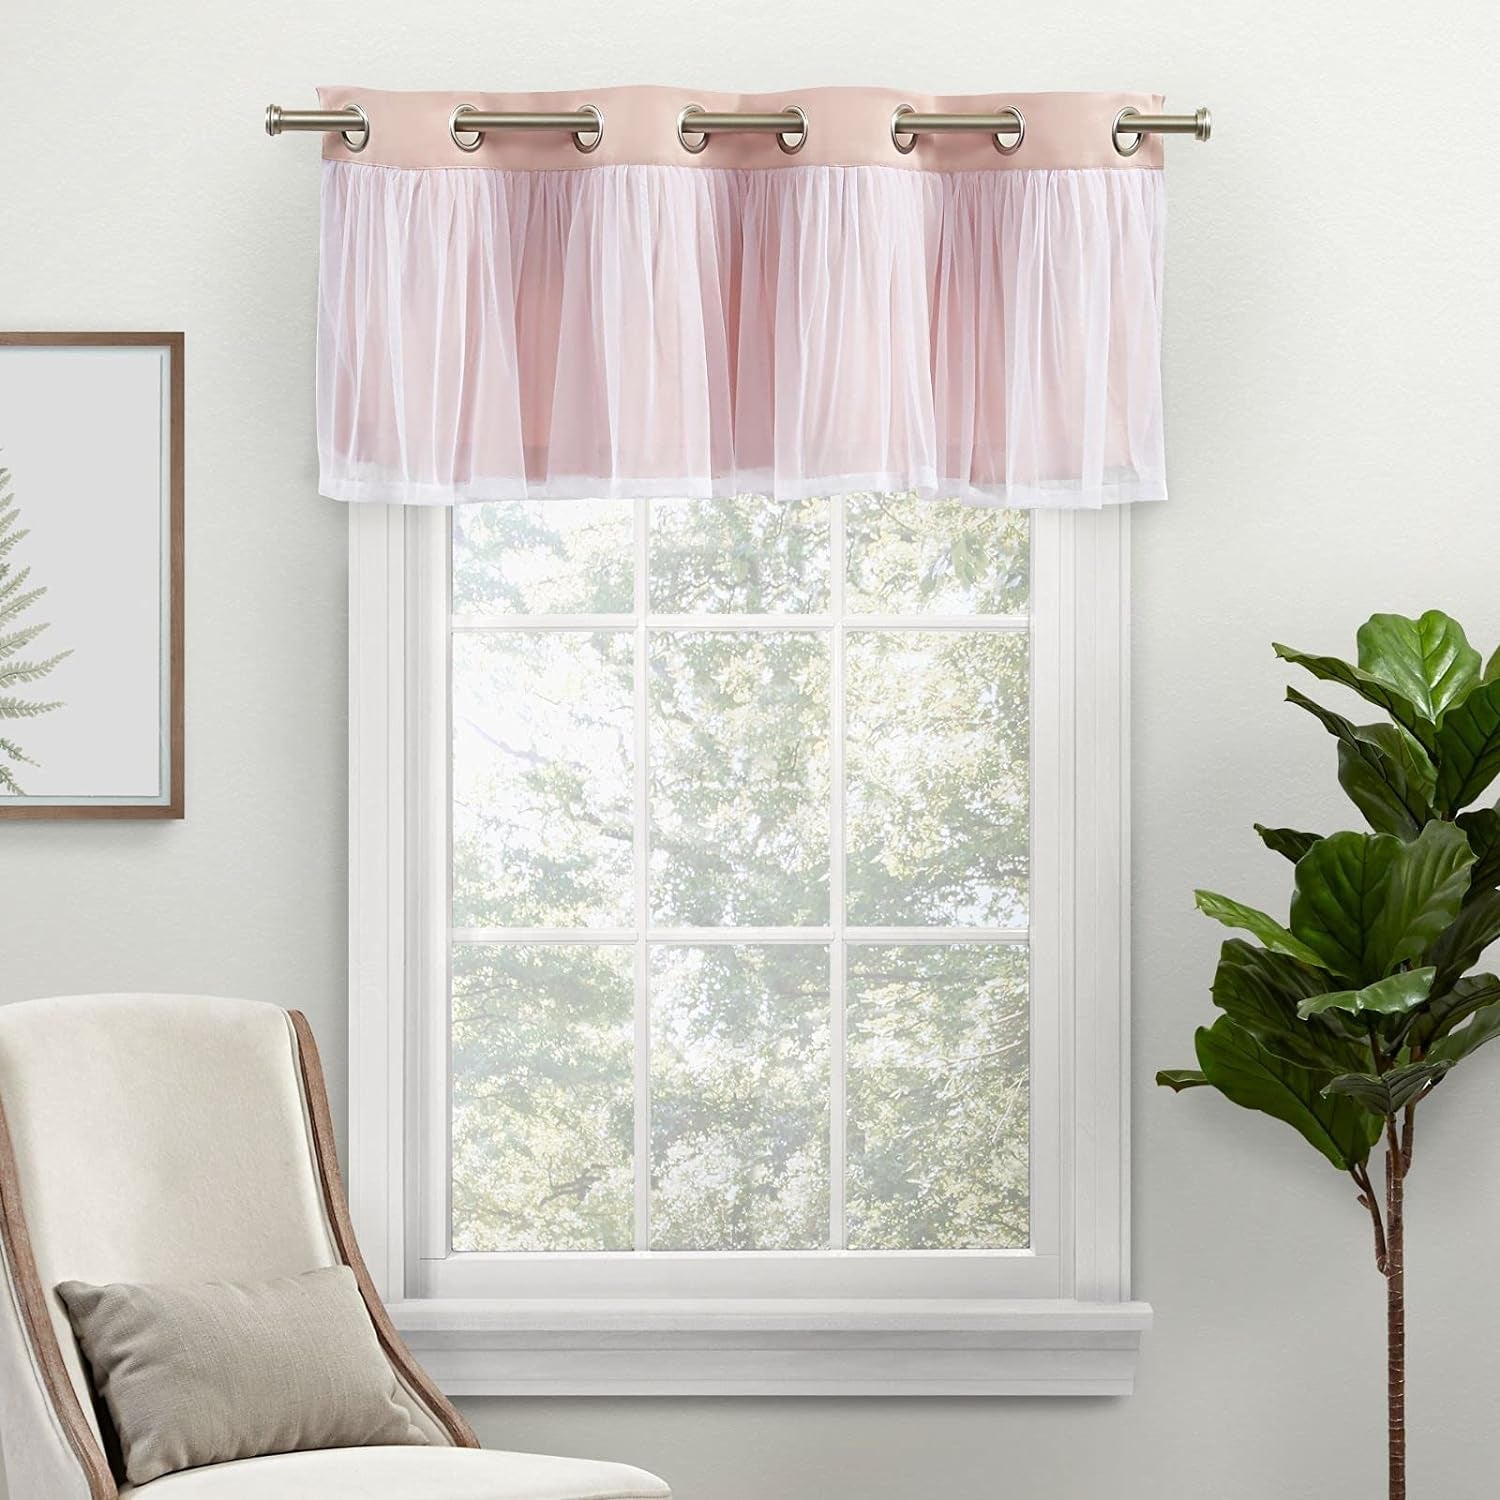 Exclusive Home Catarina Layered Room Darkening Blackout and Sheer Grommet Top Valance, 52"X18", Sand